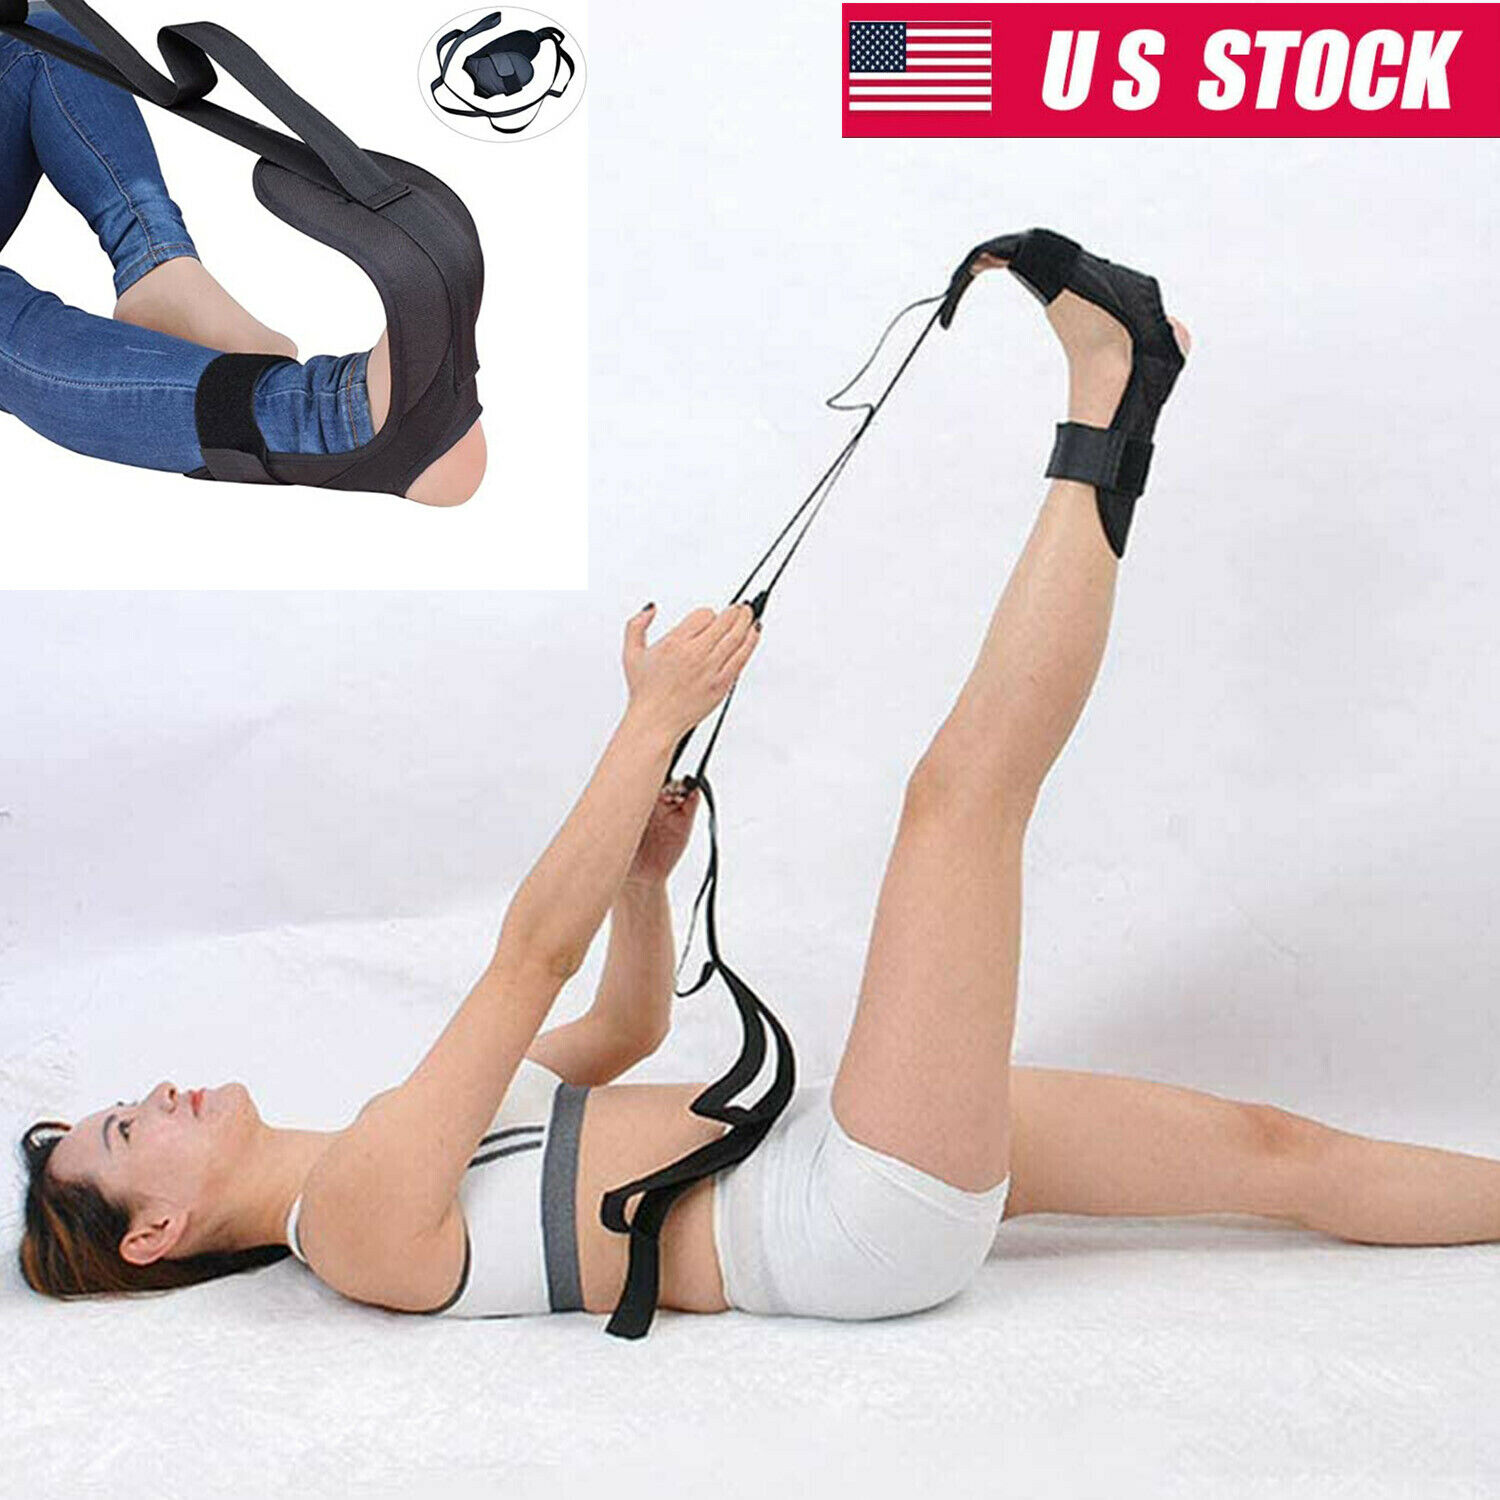 Yoga Ligament Stretching Belt Foot Drop Strap Leg Training Foot Ankle Correction 